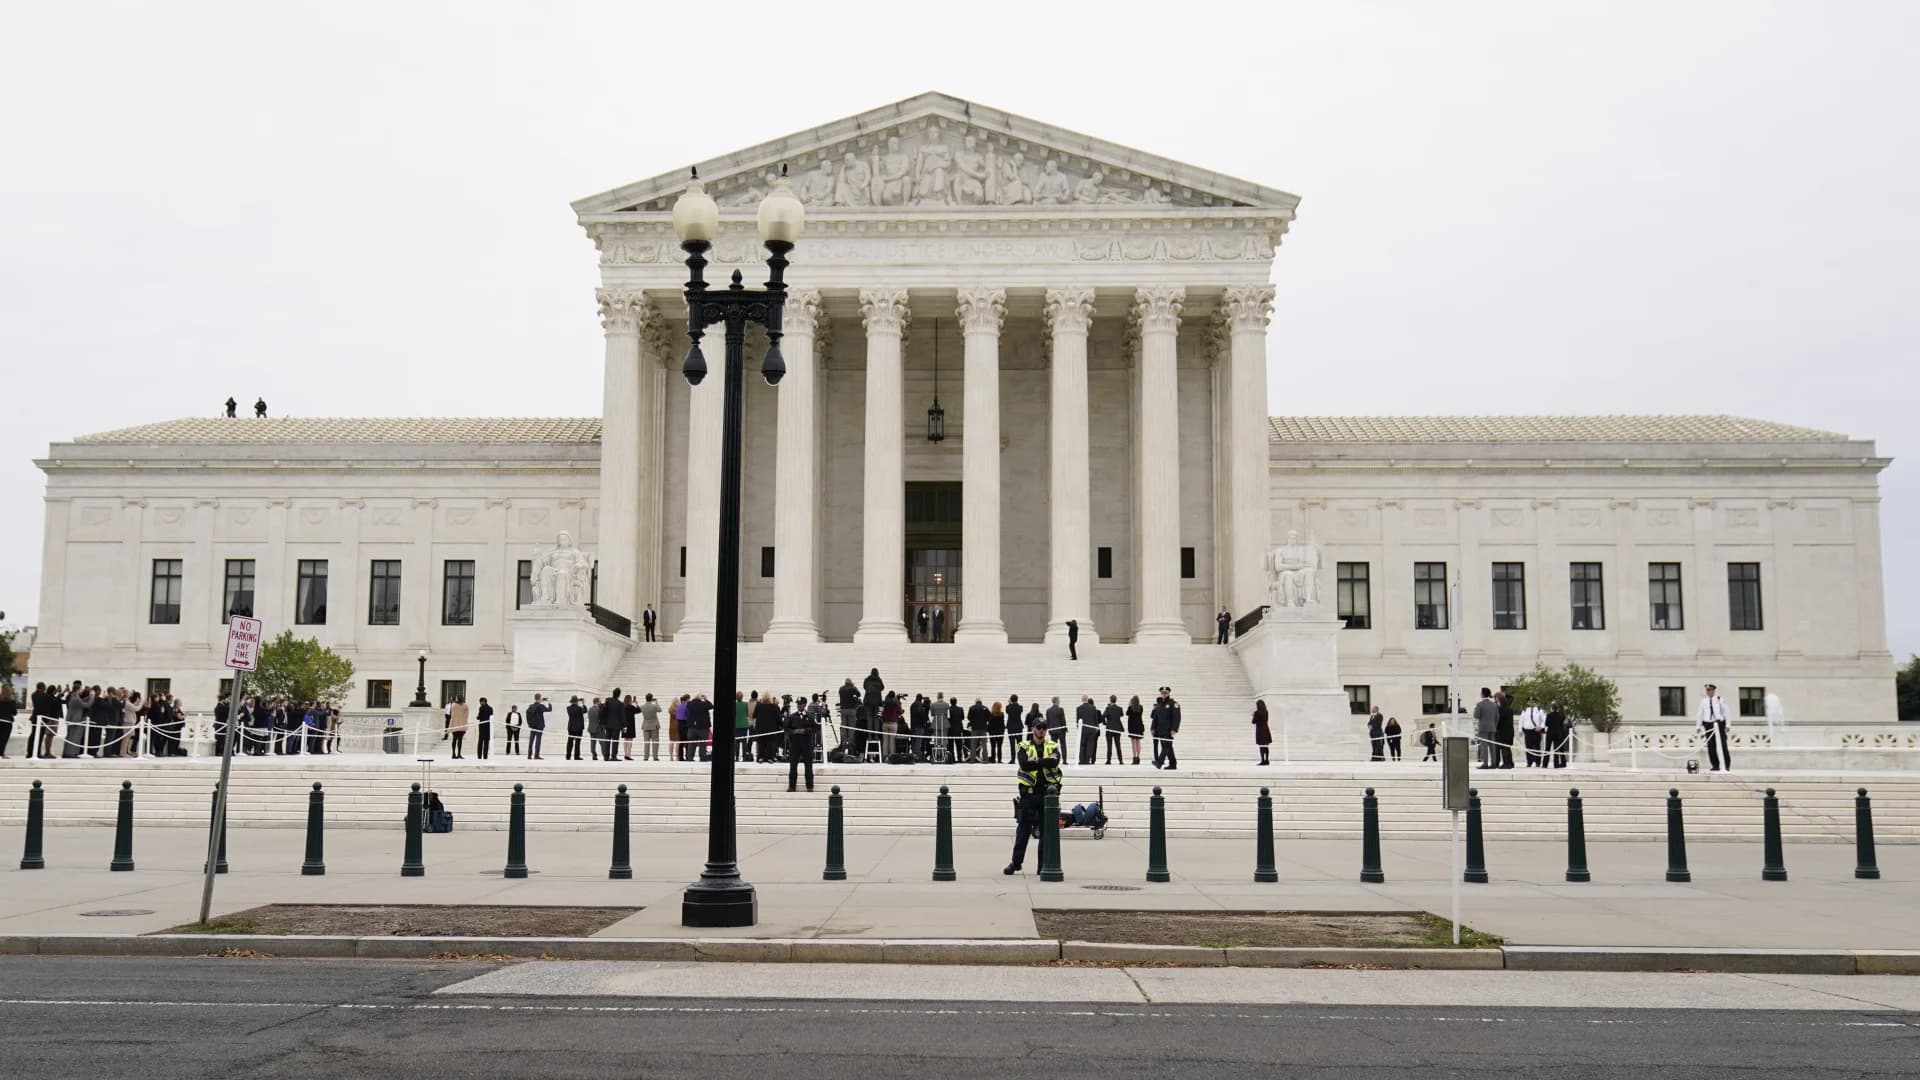 Monmouth poll: Majority of Americans see US Supreme Court as ‘out of touch’